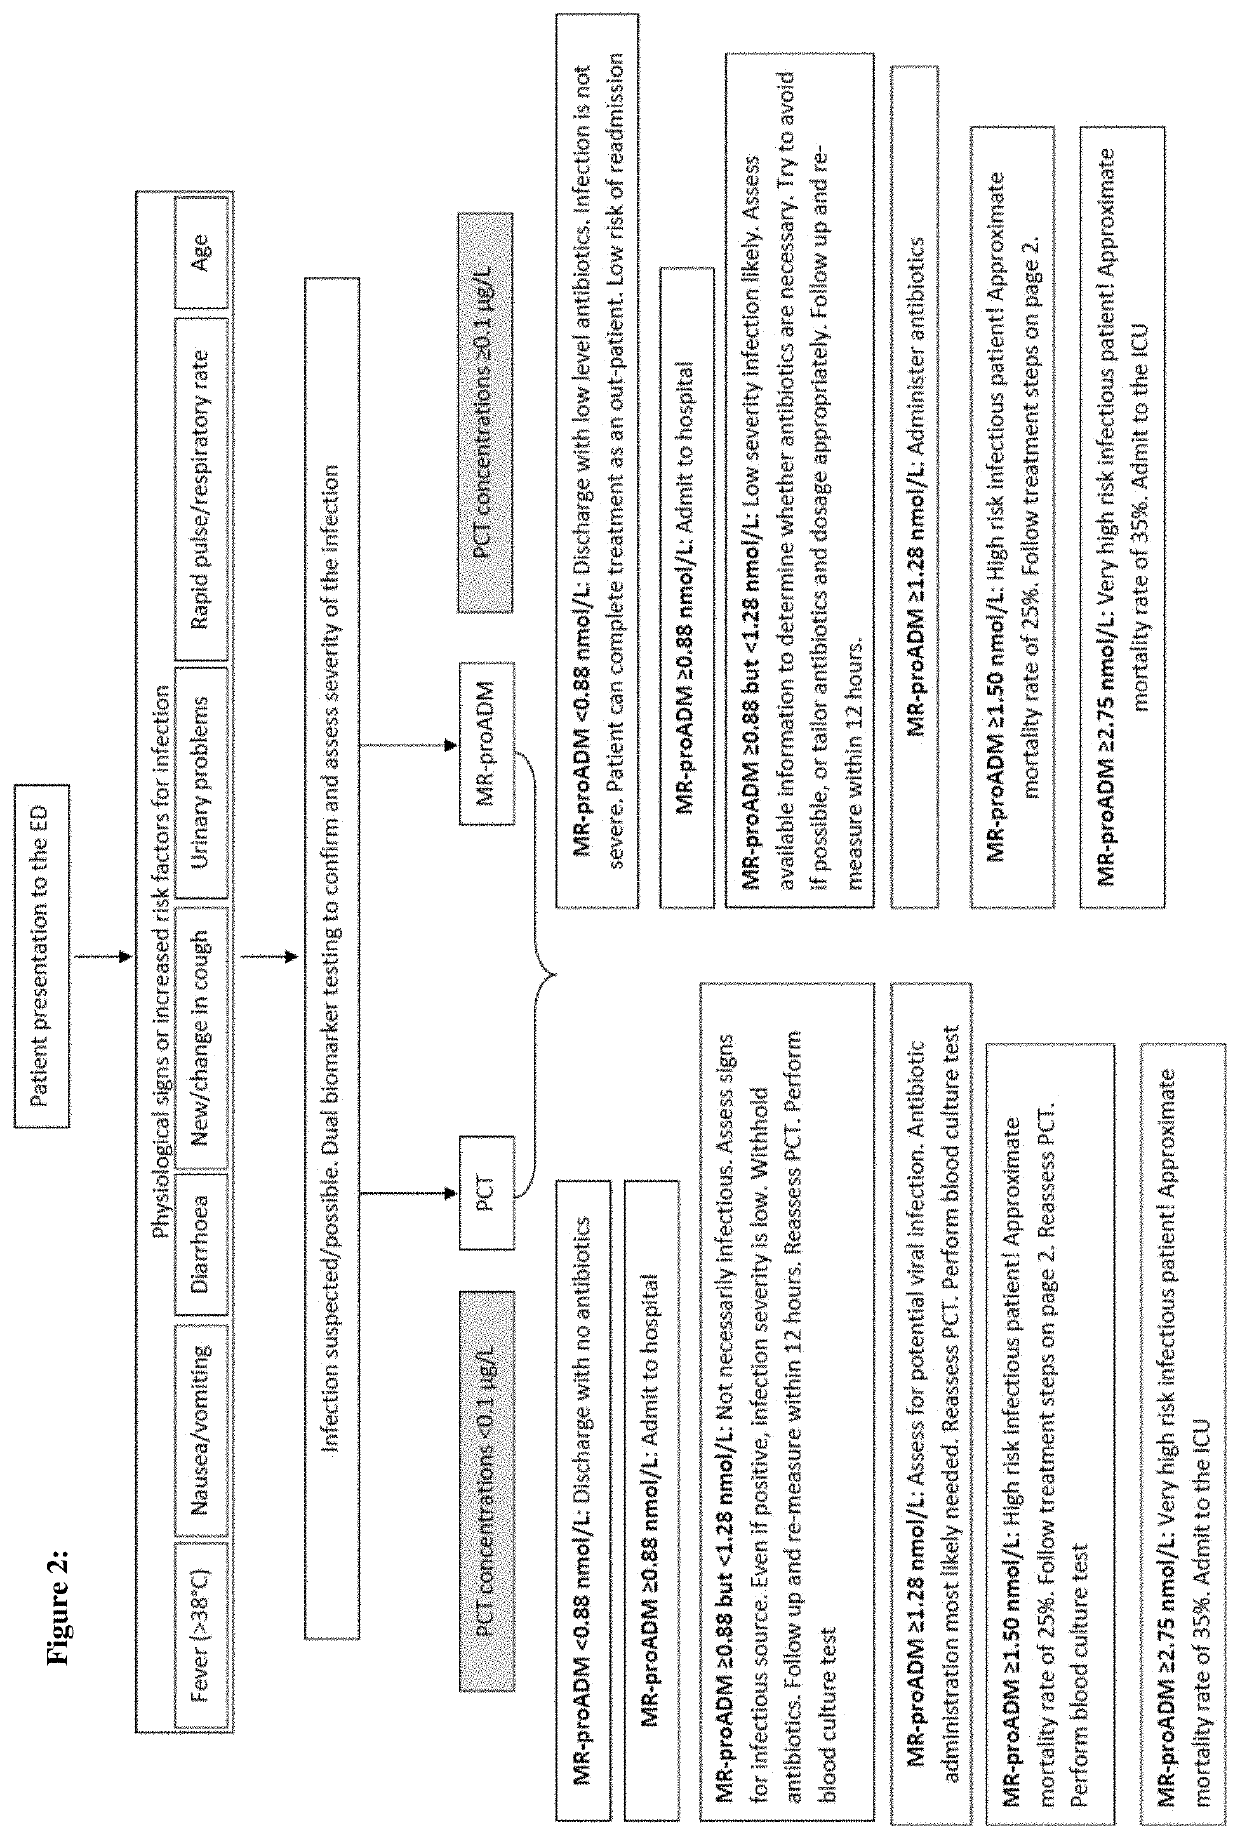 Workflow for risk assessment and patient management using procalcitonin and midregional-proadrenomedullin